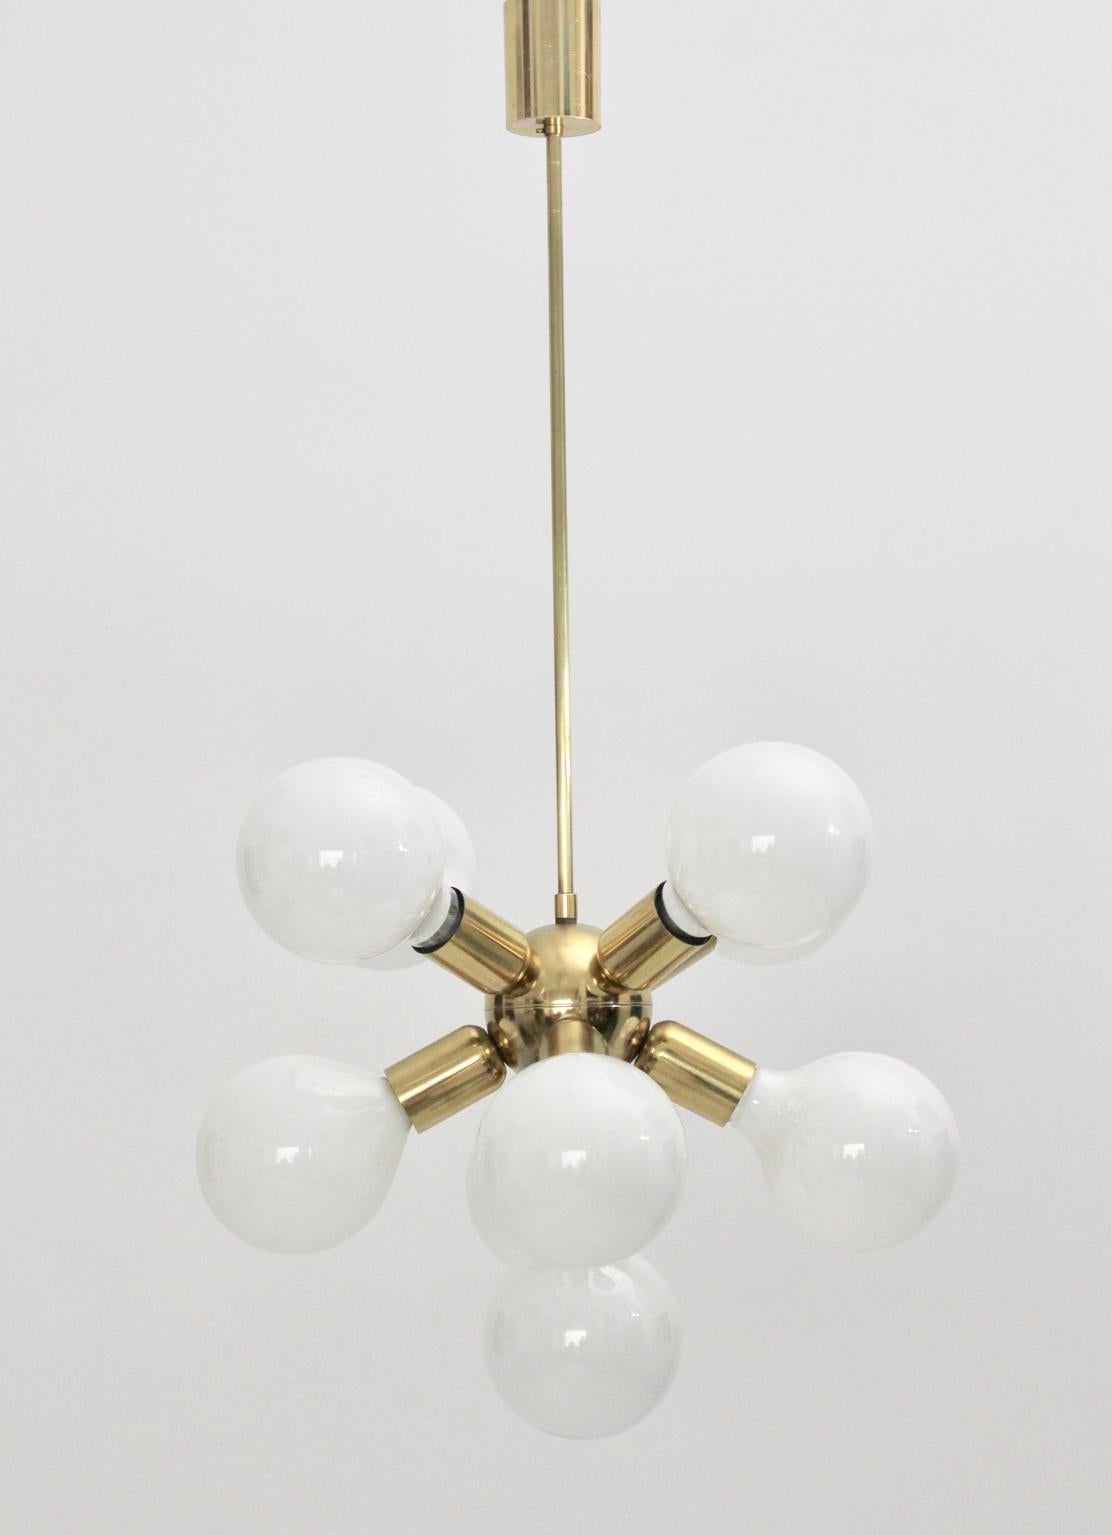 Great Sputnik chandelier made of brass and plastic from the 1970s with nine E 27 sockets.
Very good condition with minor signs of age and use.
Measures: Diameter 45 cm, total height 80 cm.
 